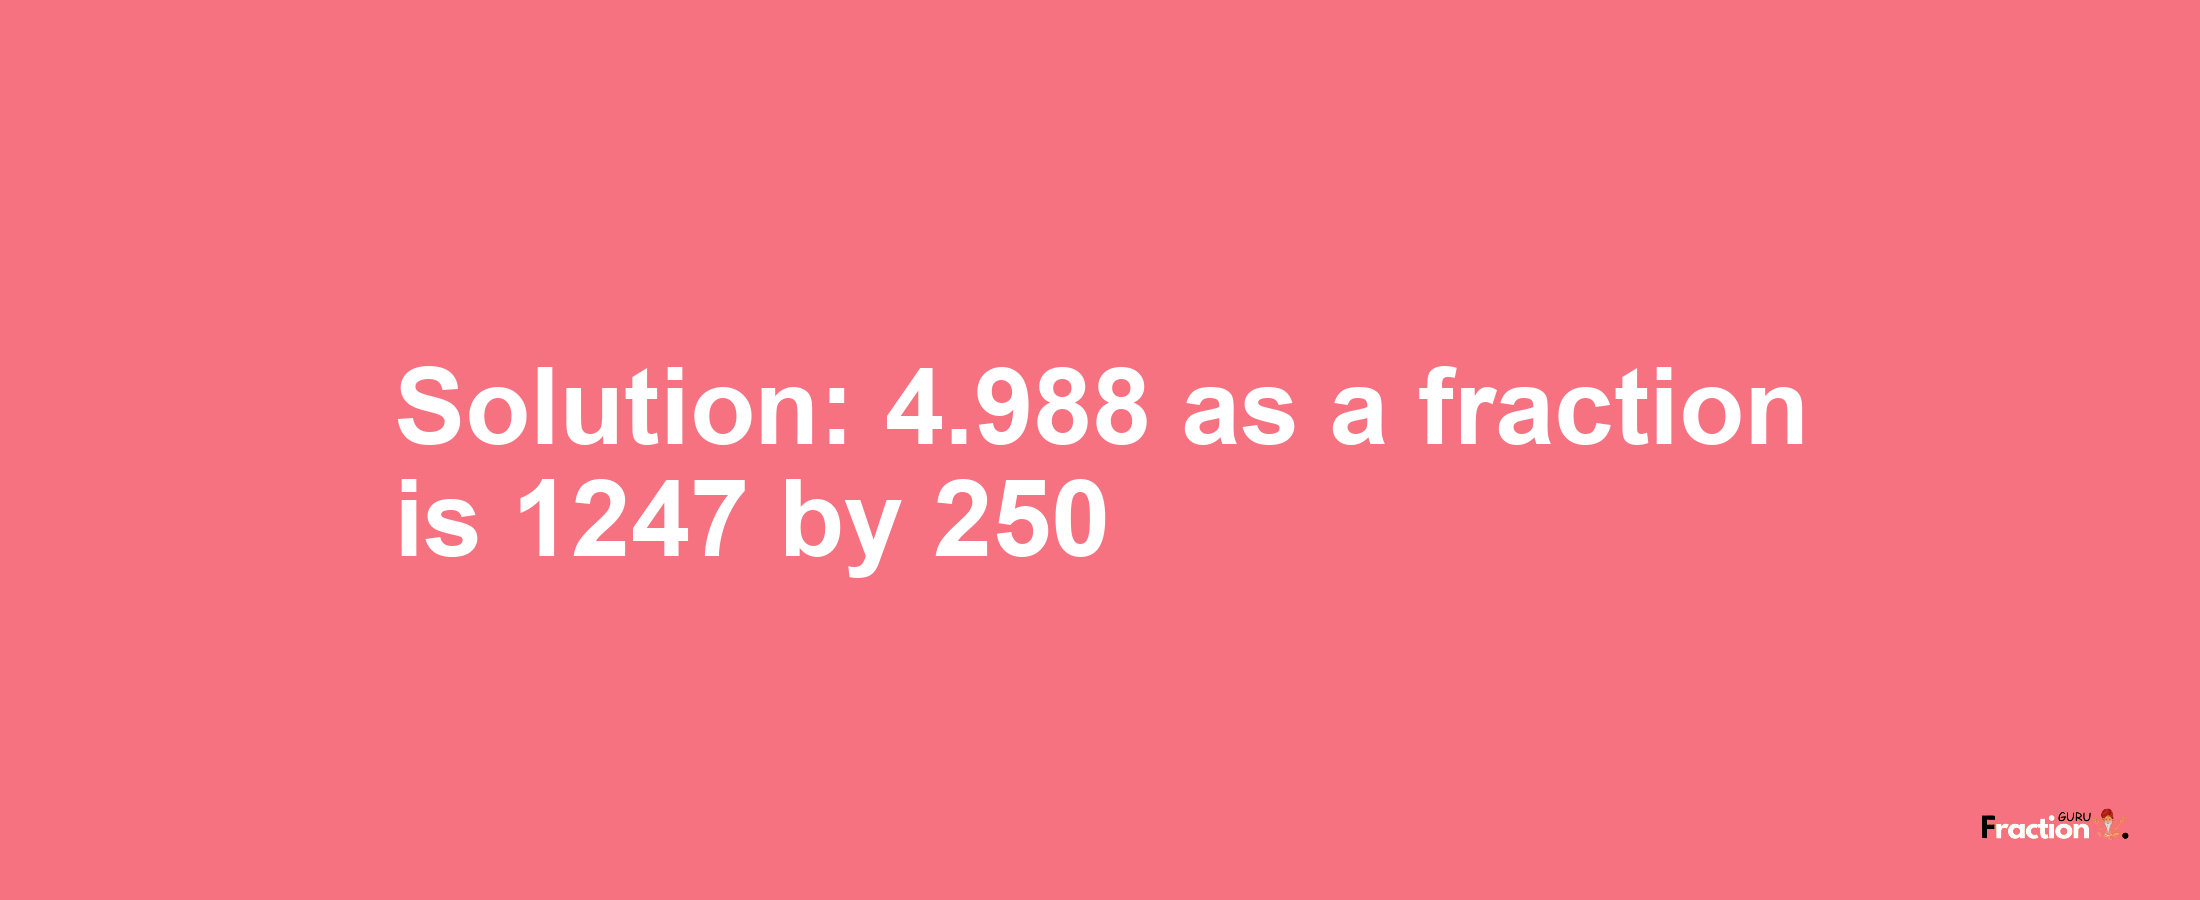 Solution:4.988 as a fraction is 1247/250